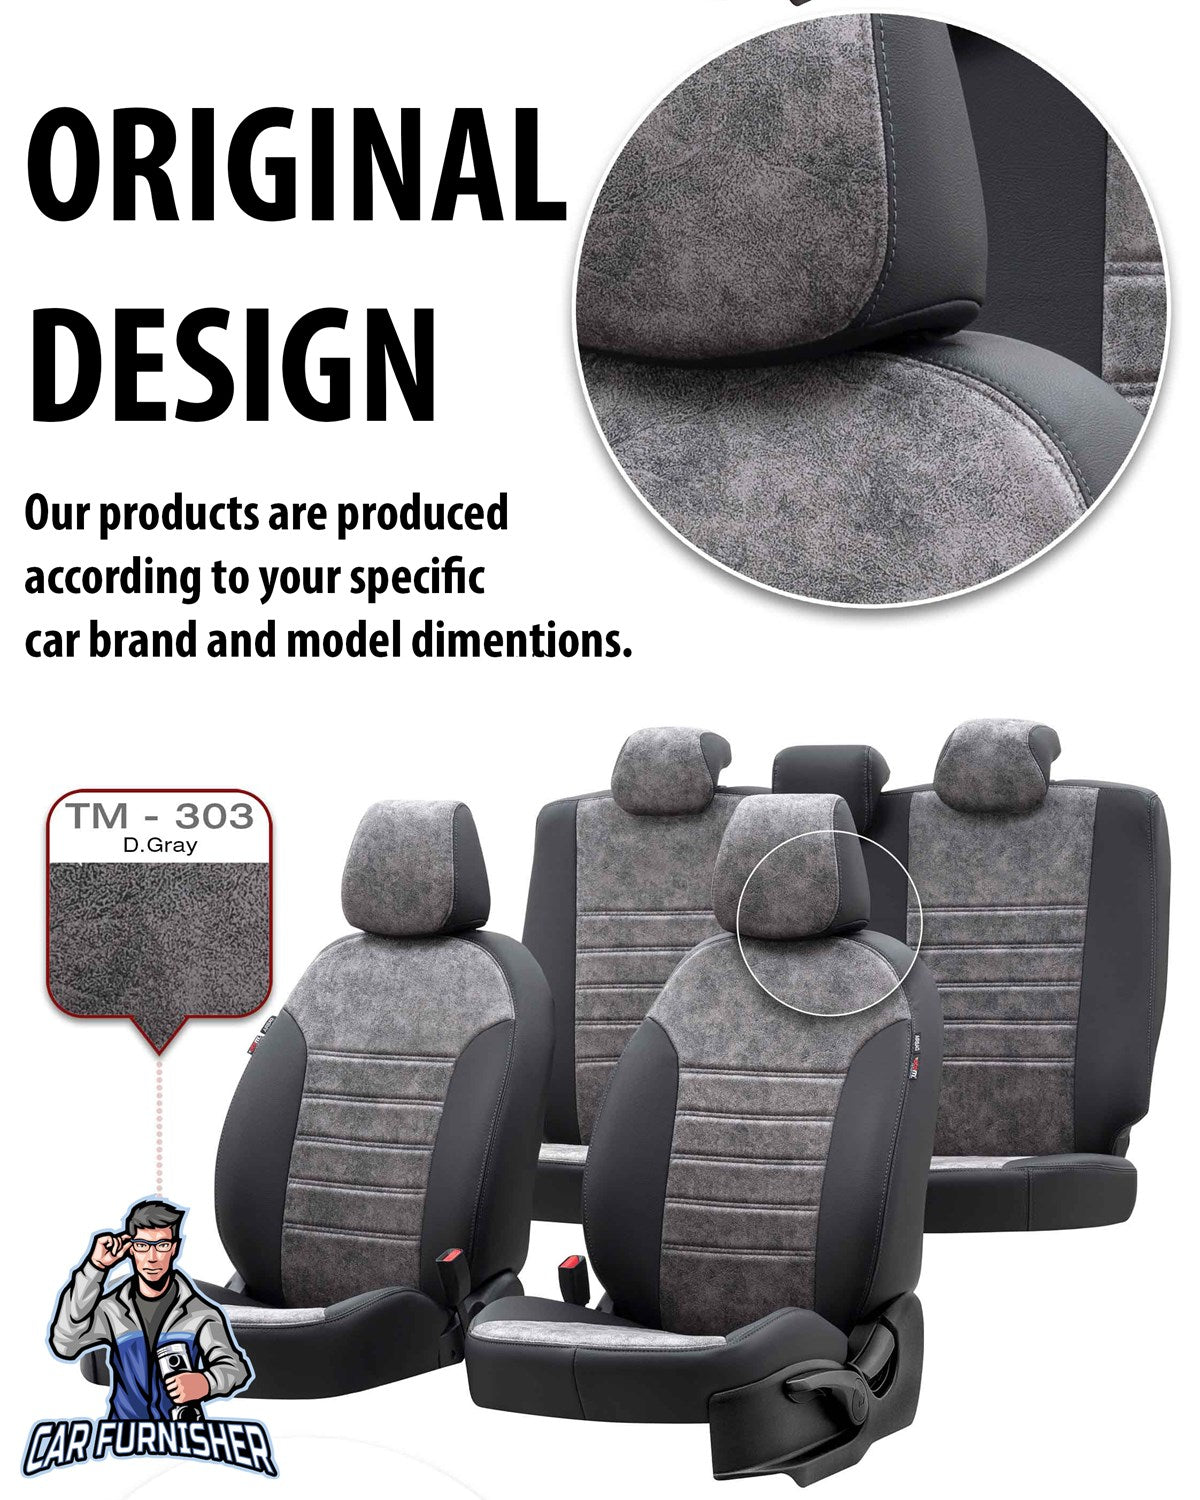 Mitsubishi Spacestar Seat Cover Milano Suede Design Burgundy Leather & Suede Fabric